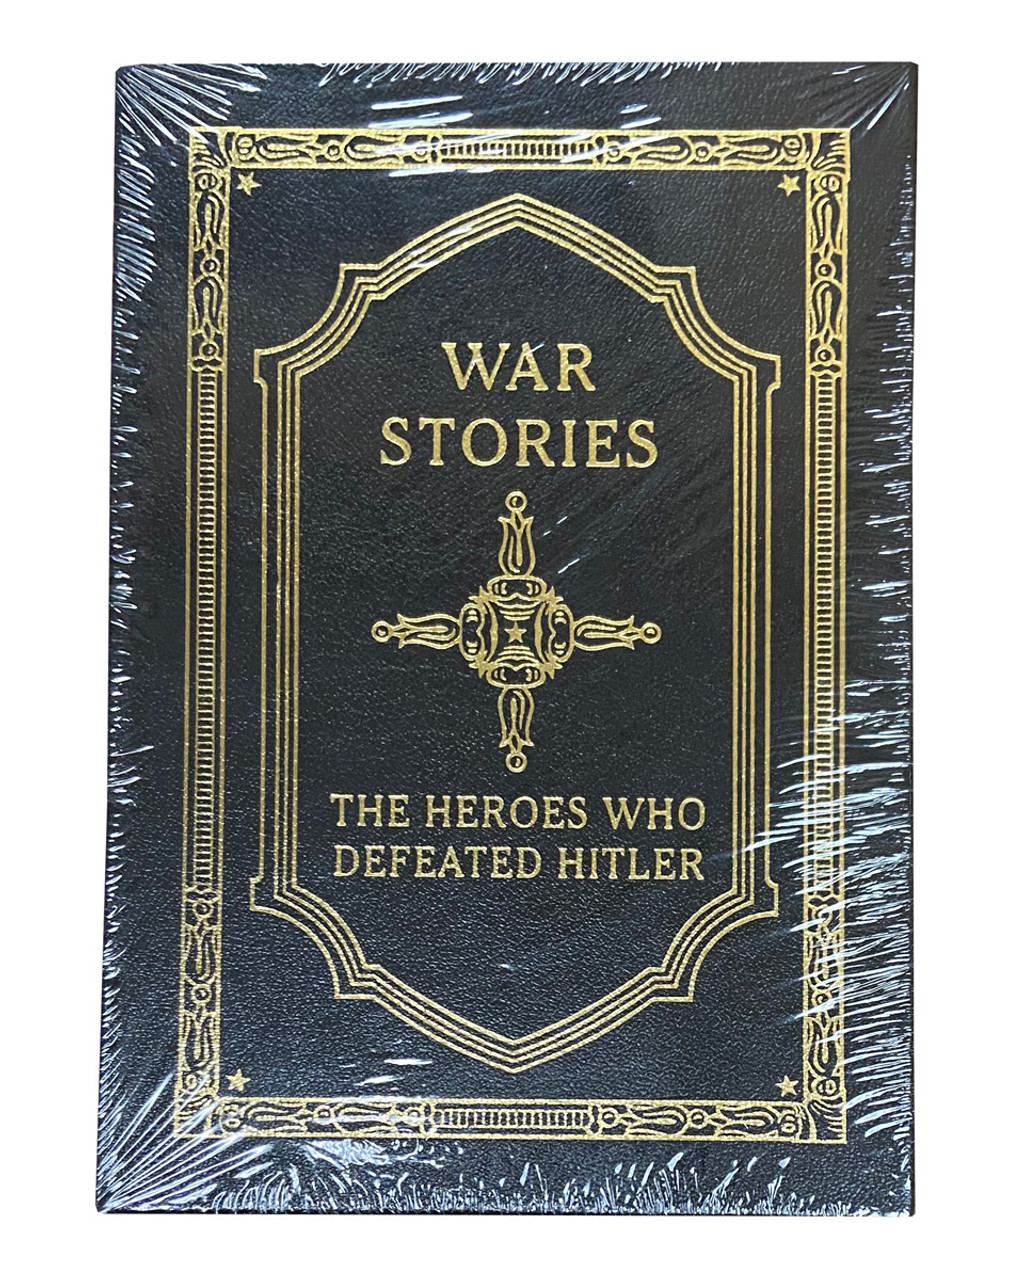 Oliver North "War Stories" Signed Limited Edition, Leather Bound Collector's 2-Vol. Matched Set [Sealed]